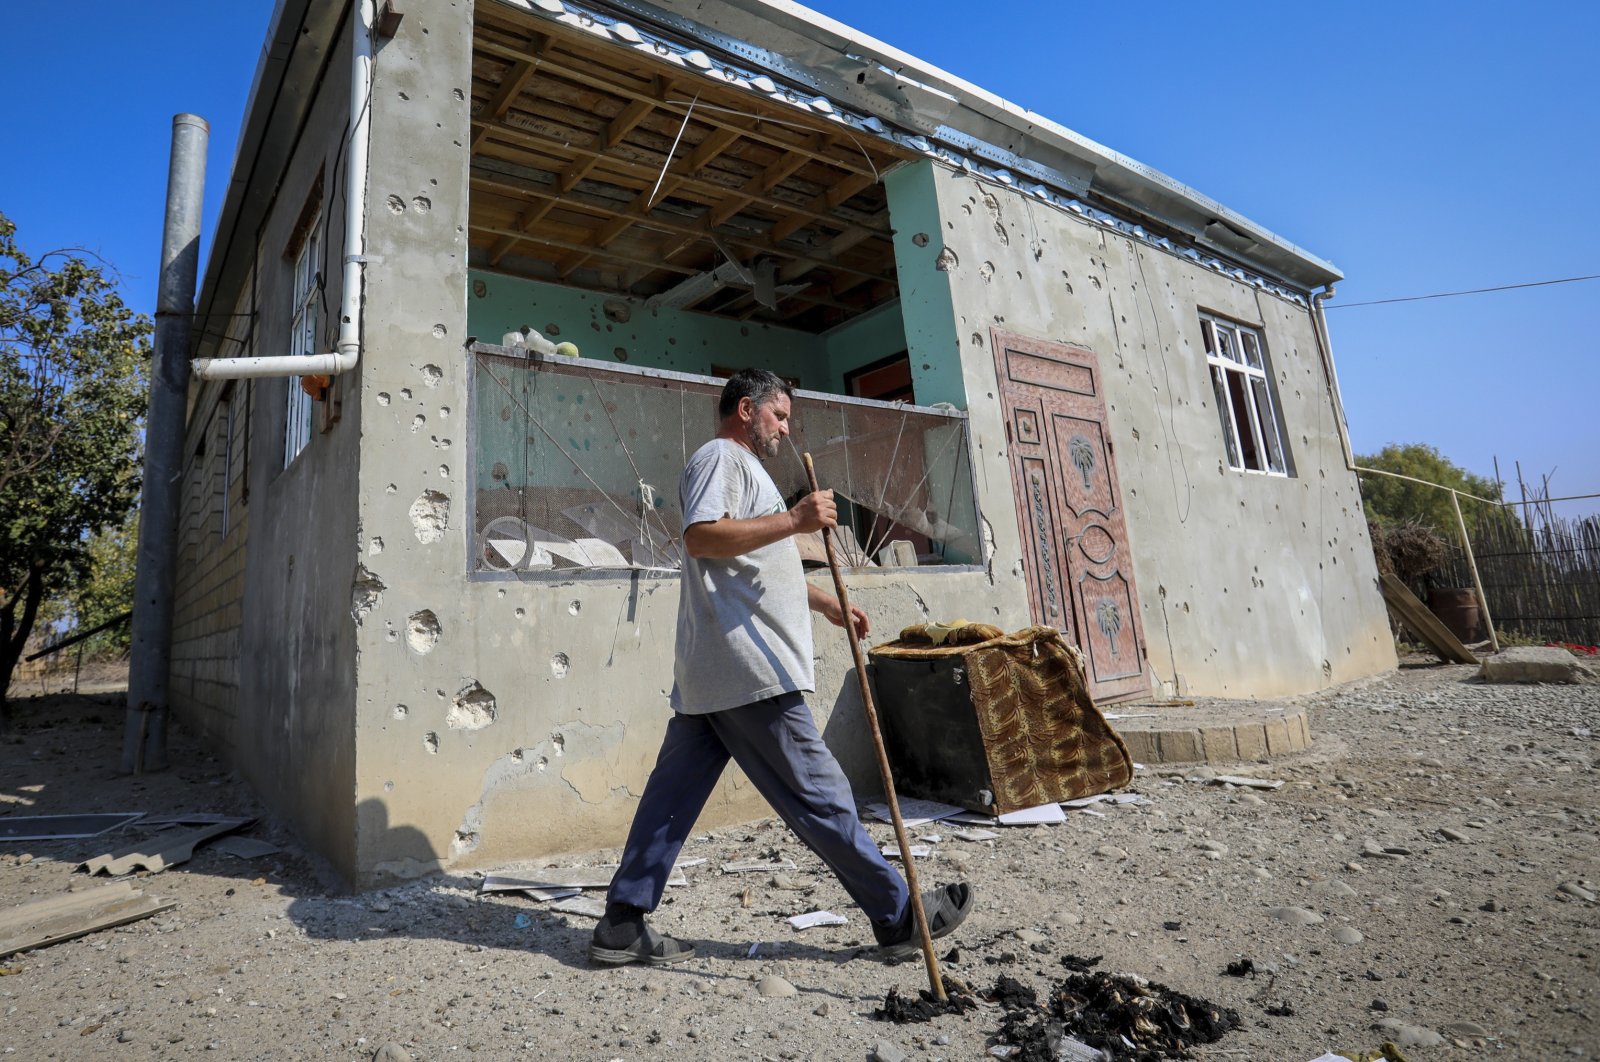 A man walks past a house damaged by shelling during fighting over the region of Nagorno-Karabakh in Aghdam, Azerbaijan, Oct. 19, 2020. (AP Photo)